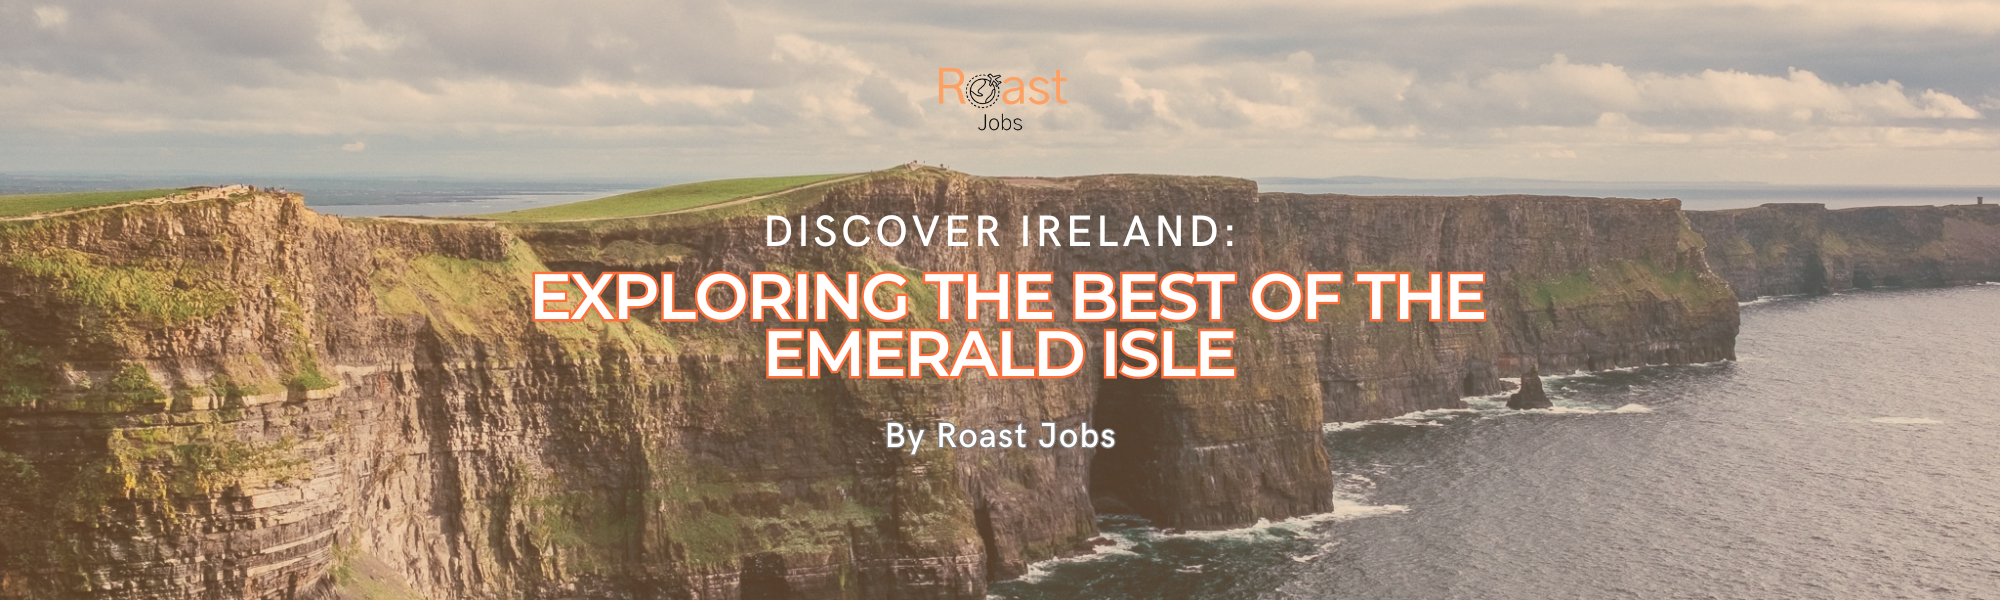 Discover Ireland. Work and Travel. Roast Jobs.